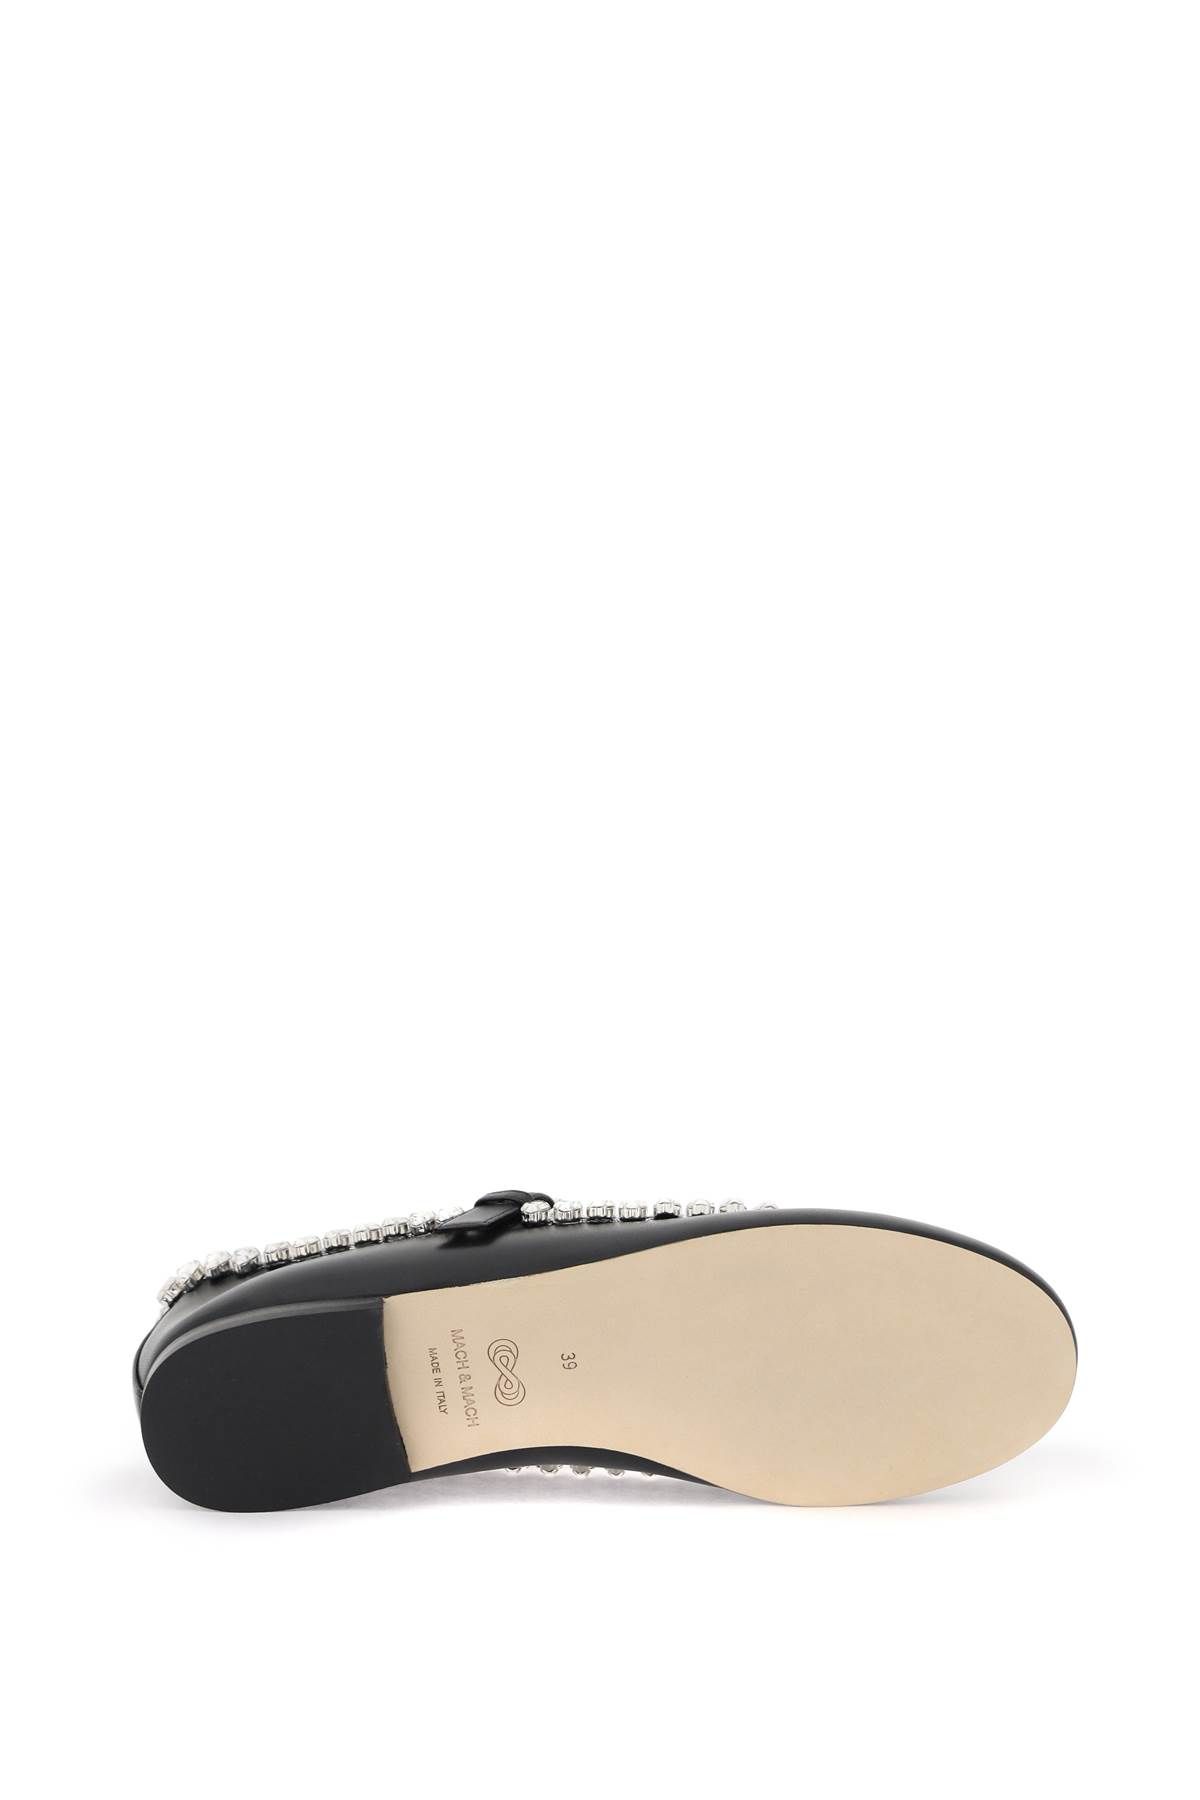 Shop Mach & Mach Audrey Ballet Flats With Heart-shaped Crystals In Black